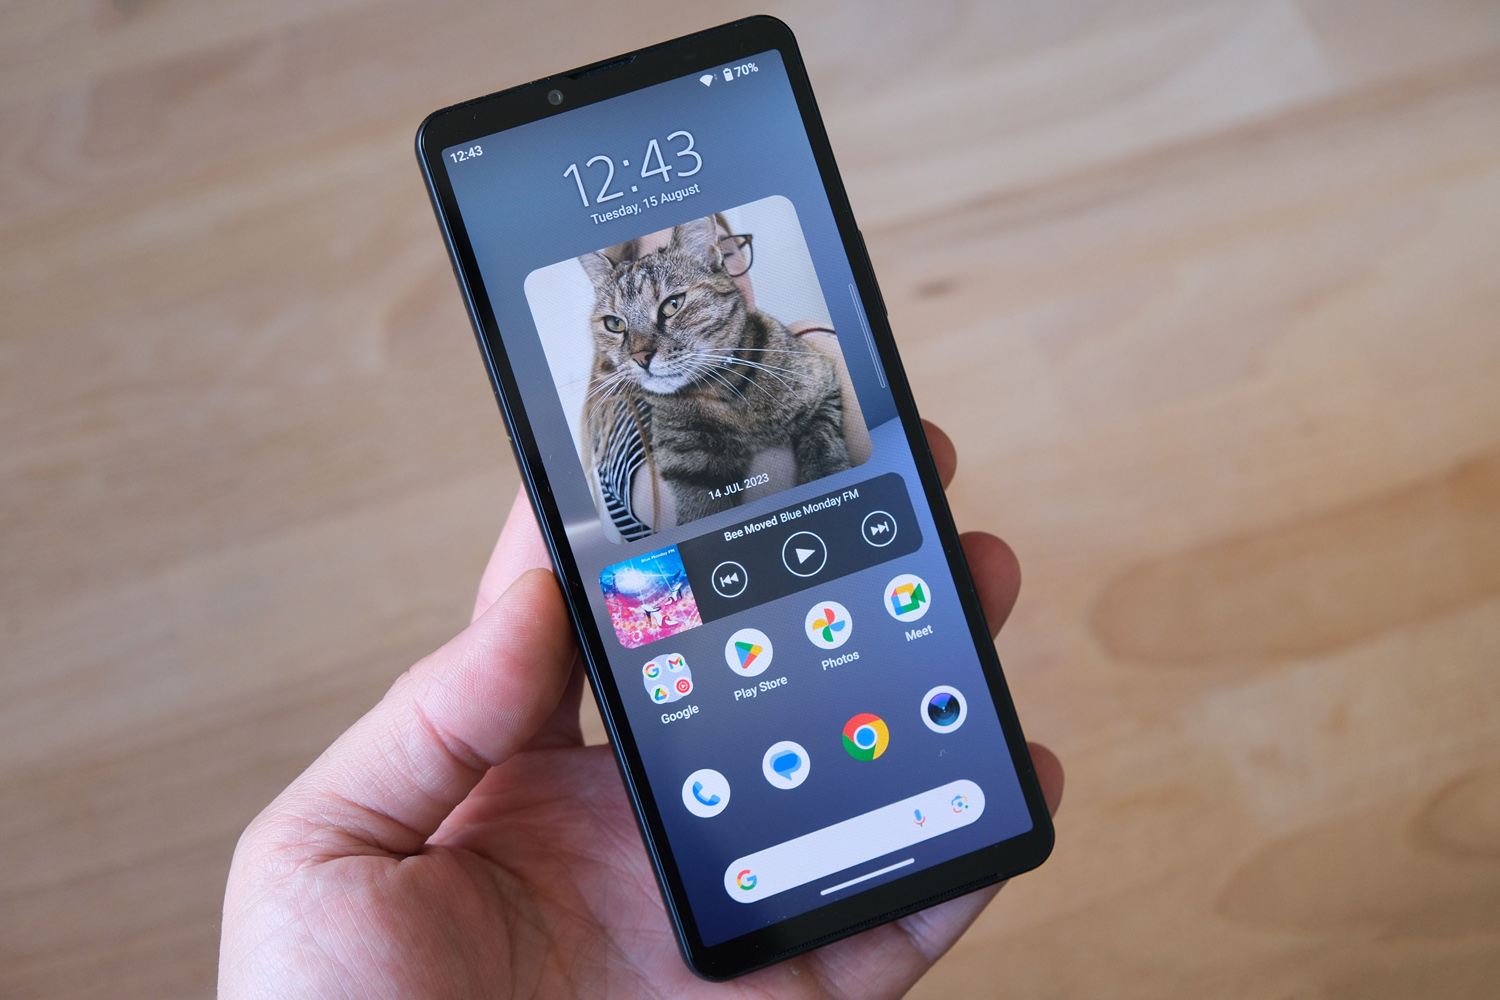 Sony Xperia 10 V review: Design, build quality, controls and connectivity